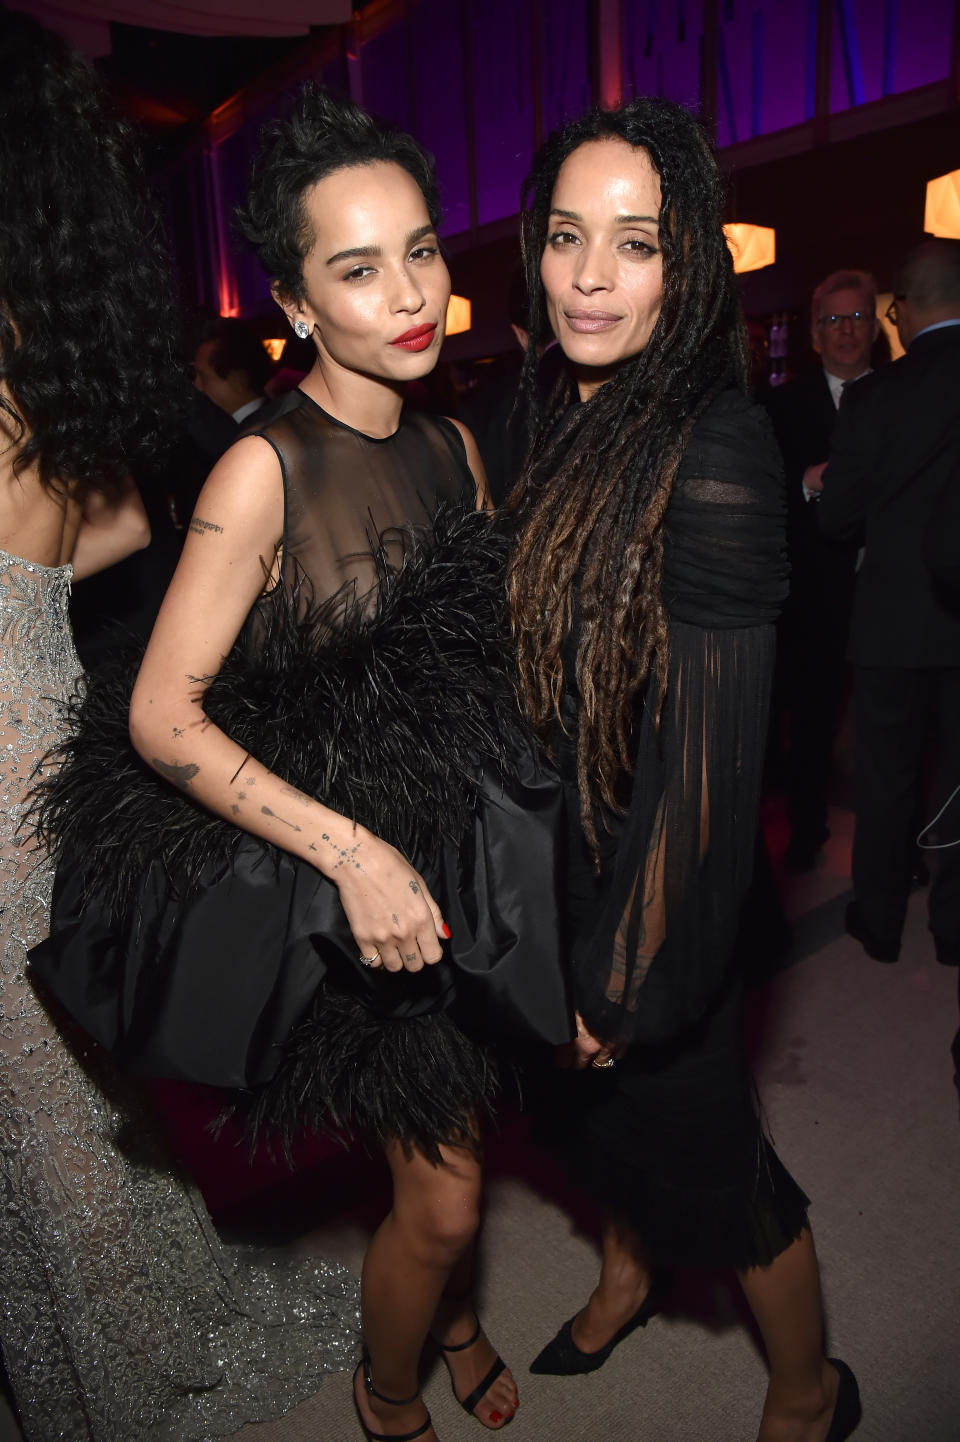 Zoe Kravitz and Lisa Bonet attend the 2018 Vanity Fair Oscar Party on March 4, 2018. (Photo by Kevin Mazur/Getty Images) | Mazur—WireImage/VF18/Getty Images